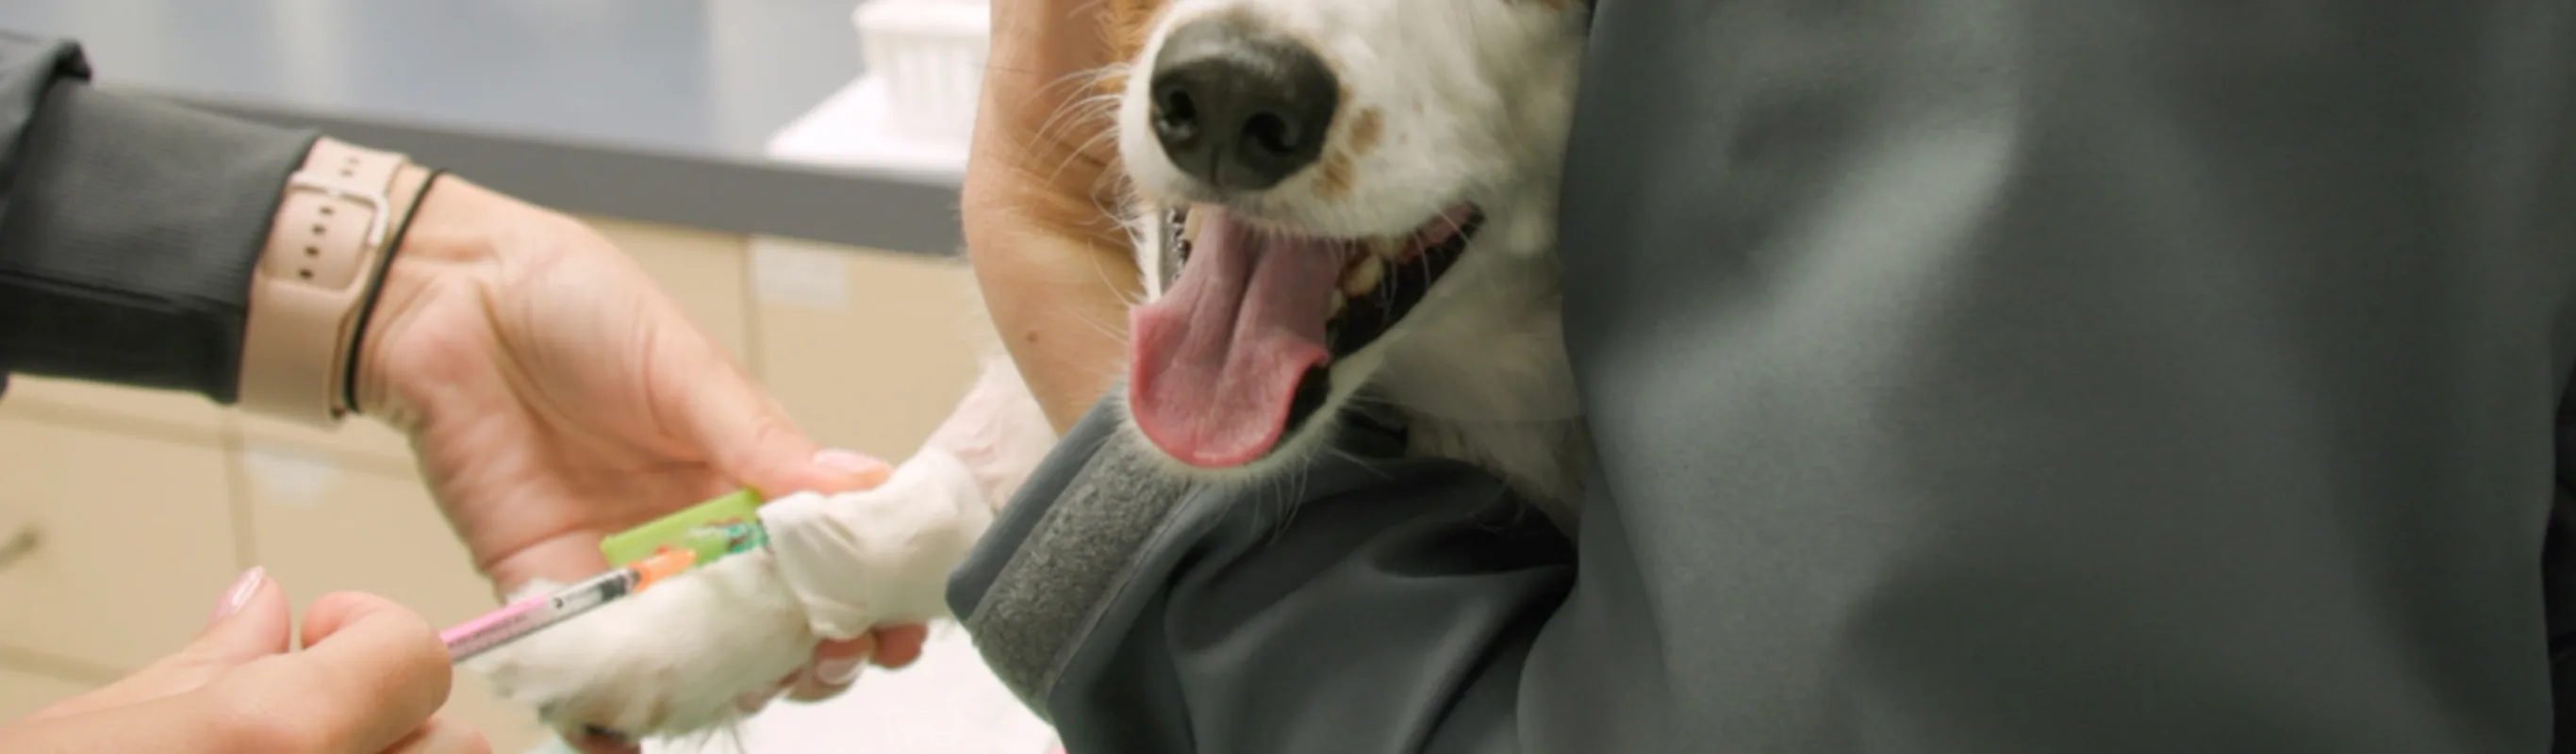 Tan and white dog with tongue out receiving a shot